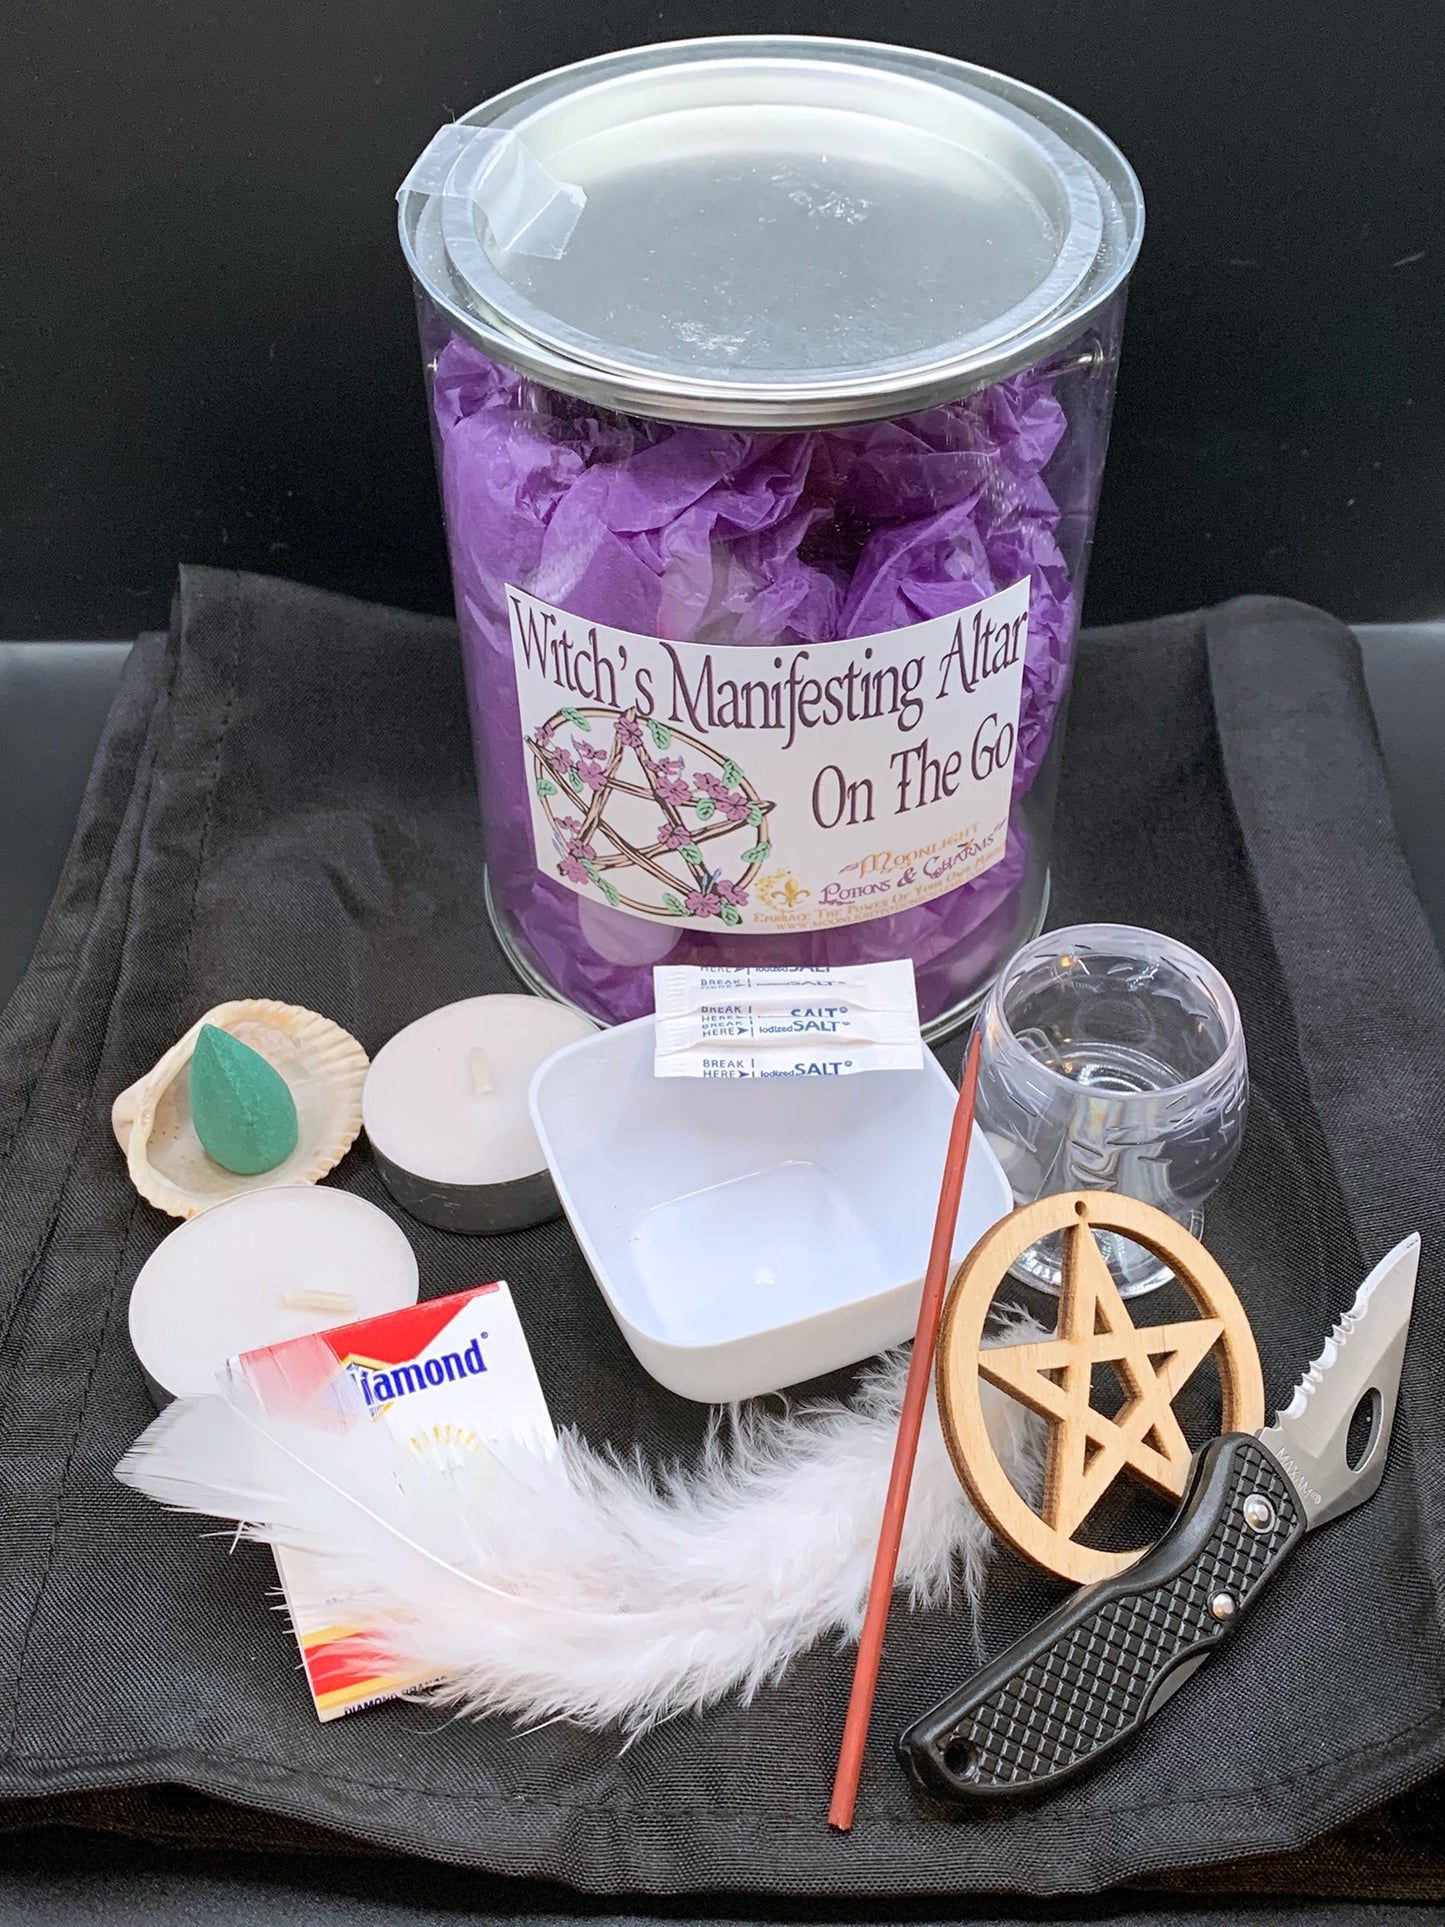 Witch's Manifesting Altar On The Go, Compact Altar - Moonlight Potions & Charms